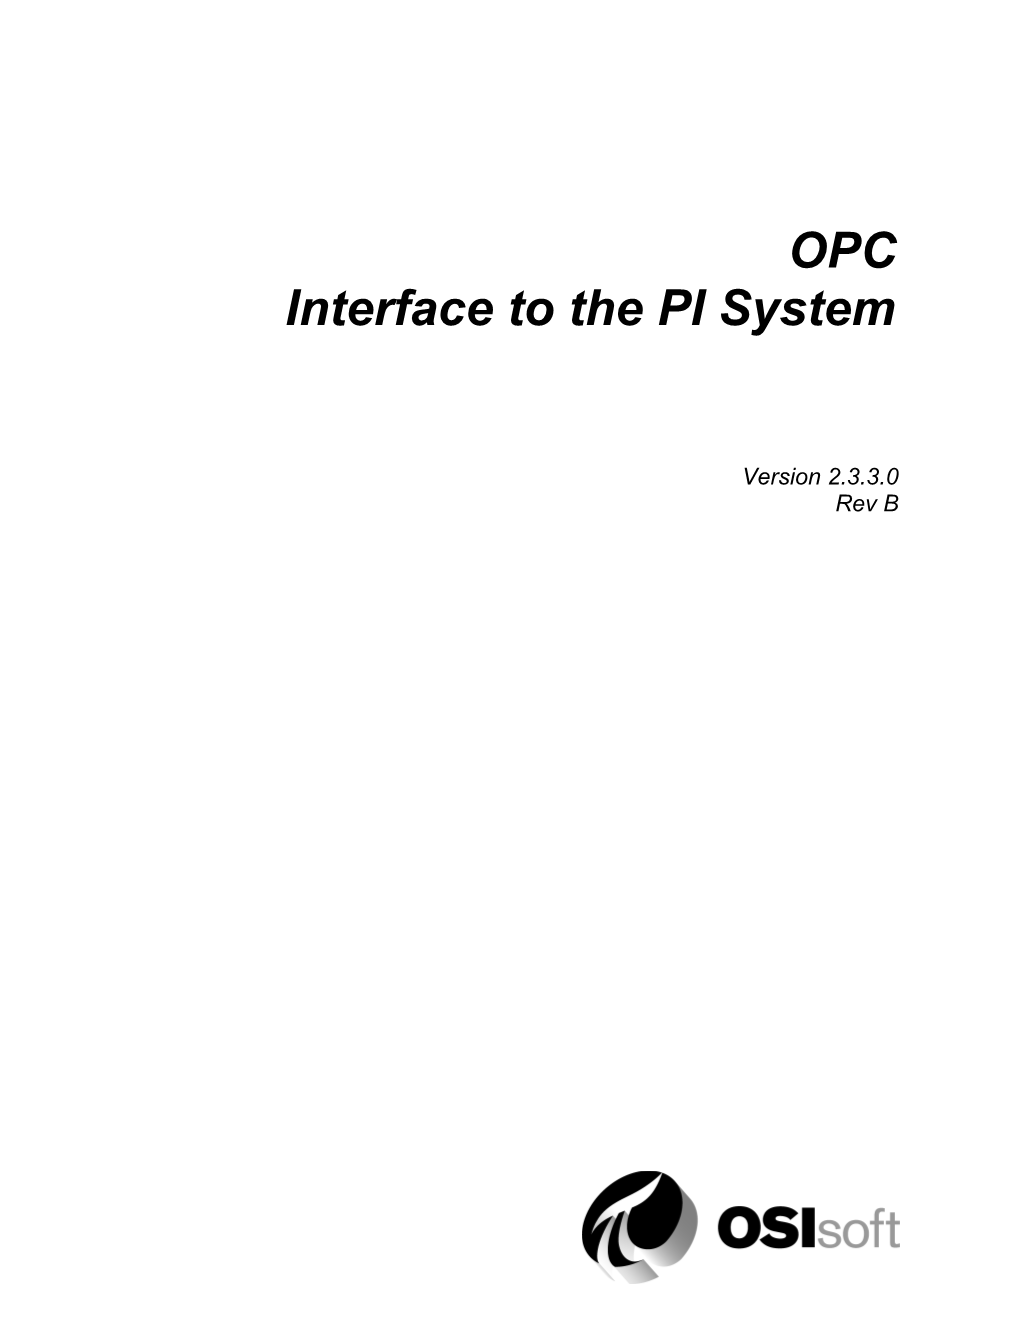 OPC Interface to the PI System